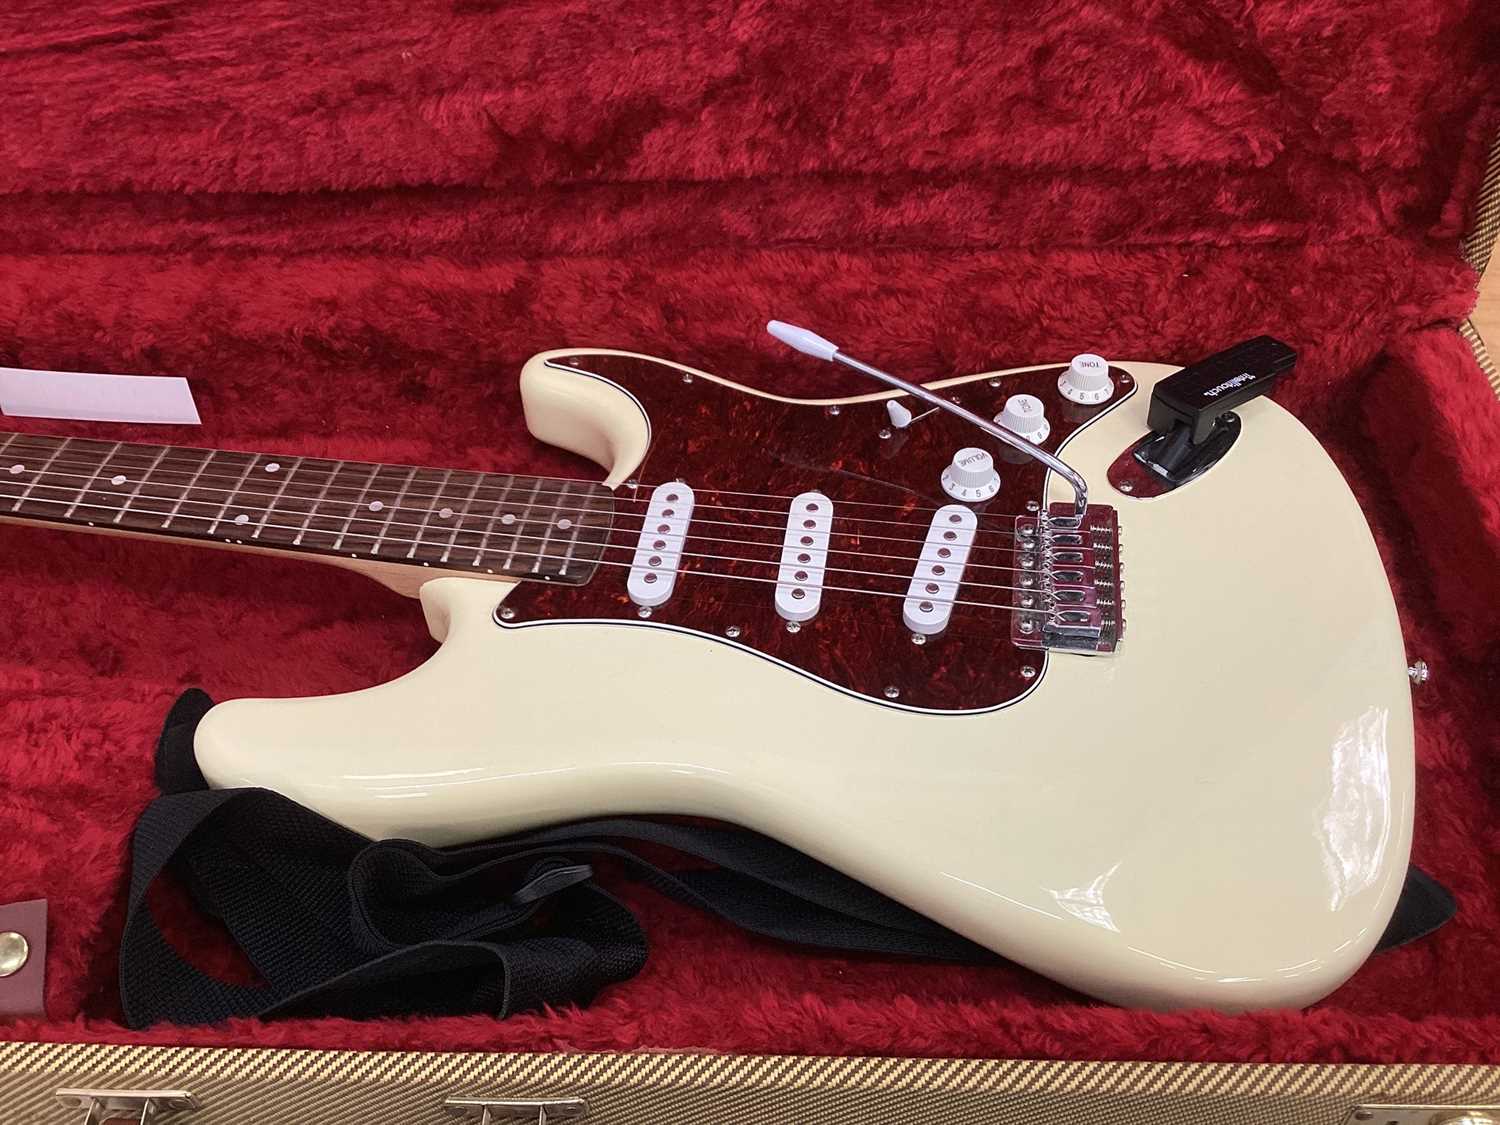 Fender Stratocaster cream electric guitar in case - Image 2 of 22